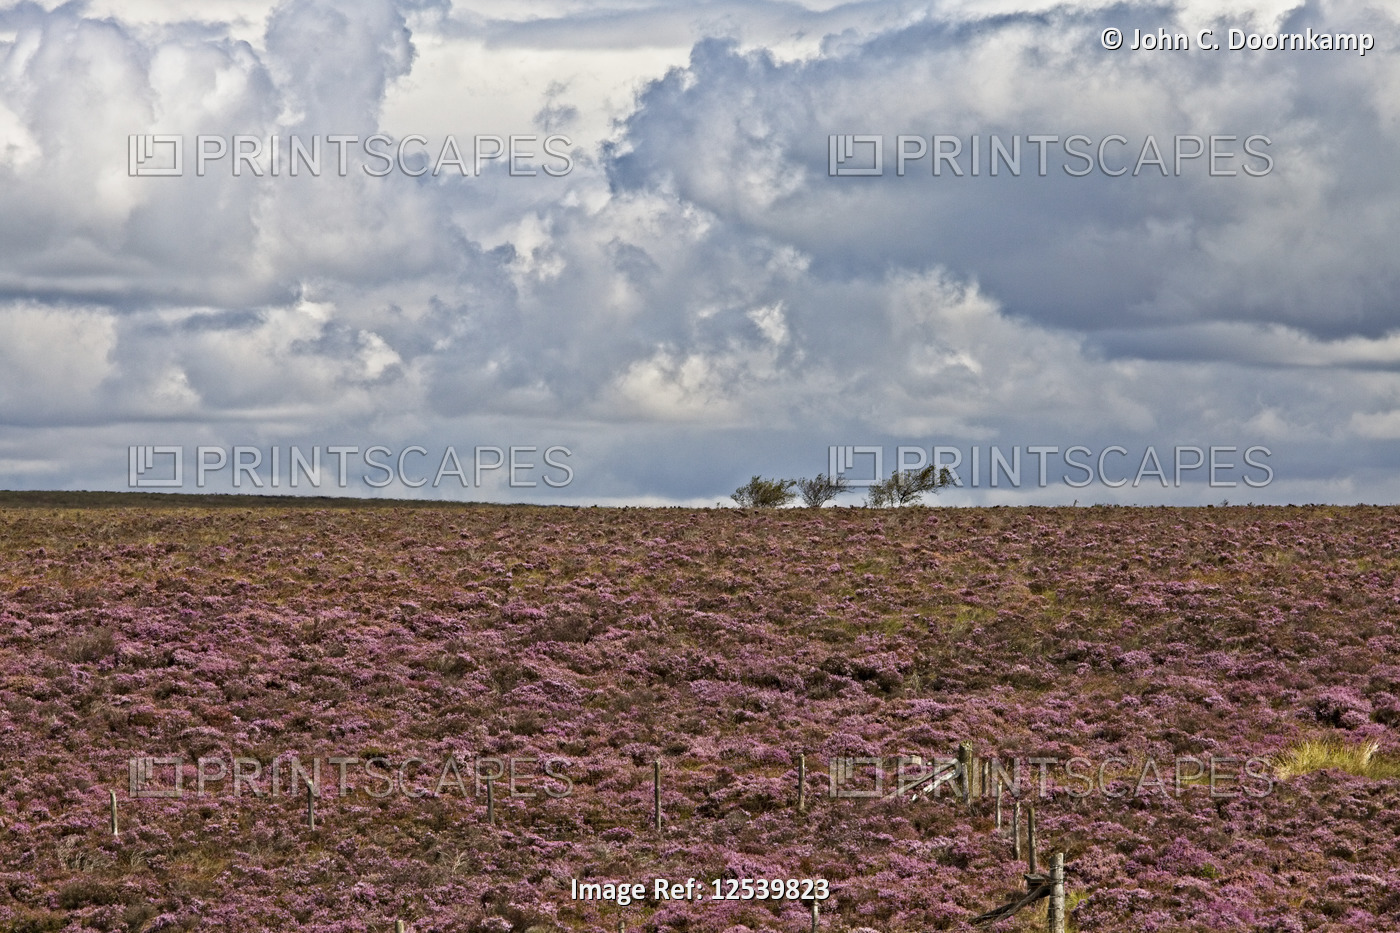 LANDSCAPE COVERED IN PURPLE HEATHER RIGHT TO ITS SKYLINE